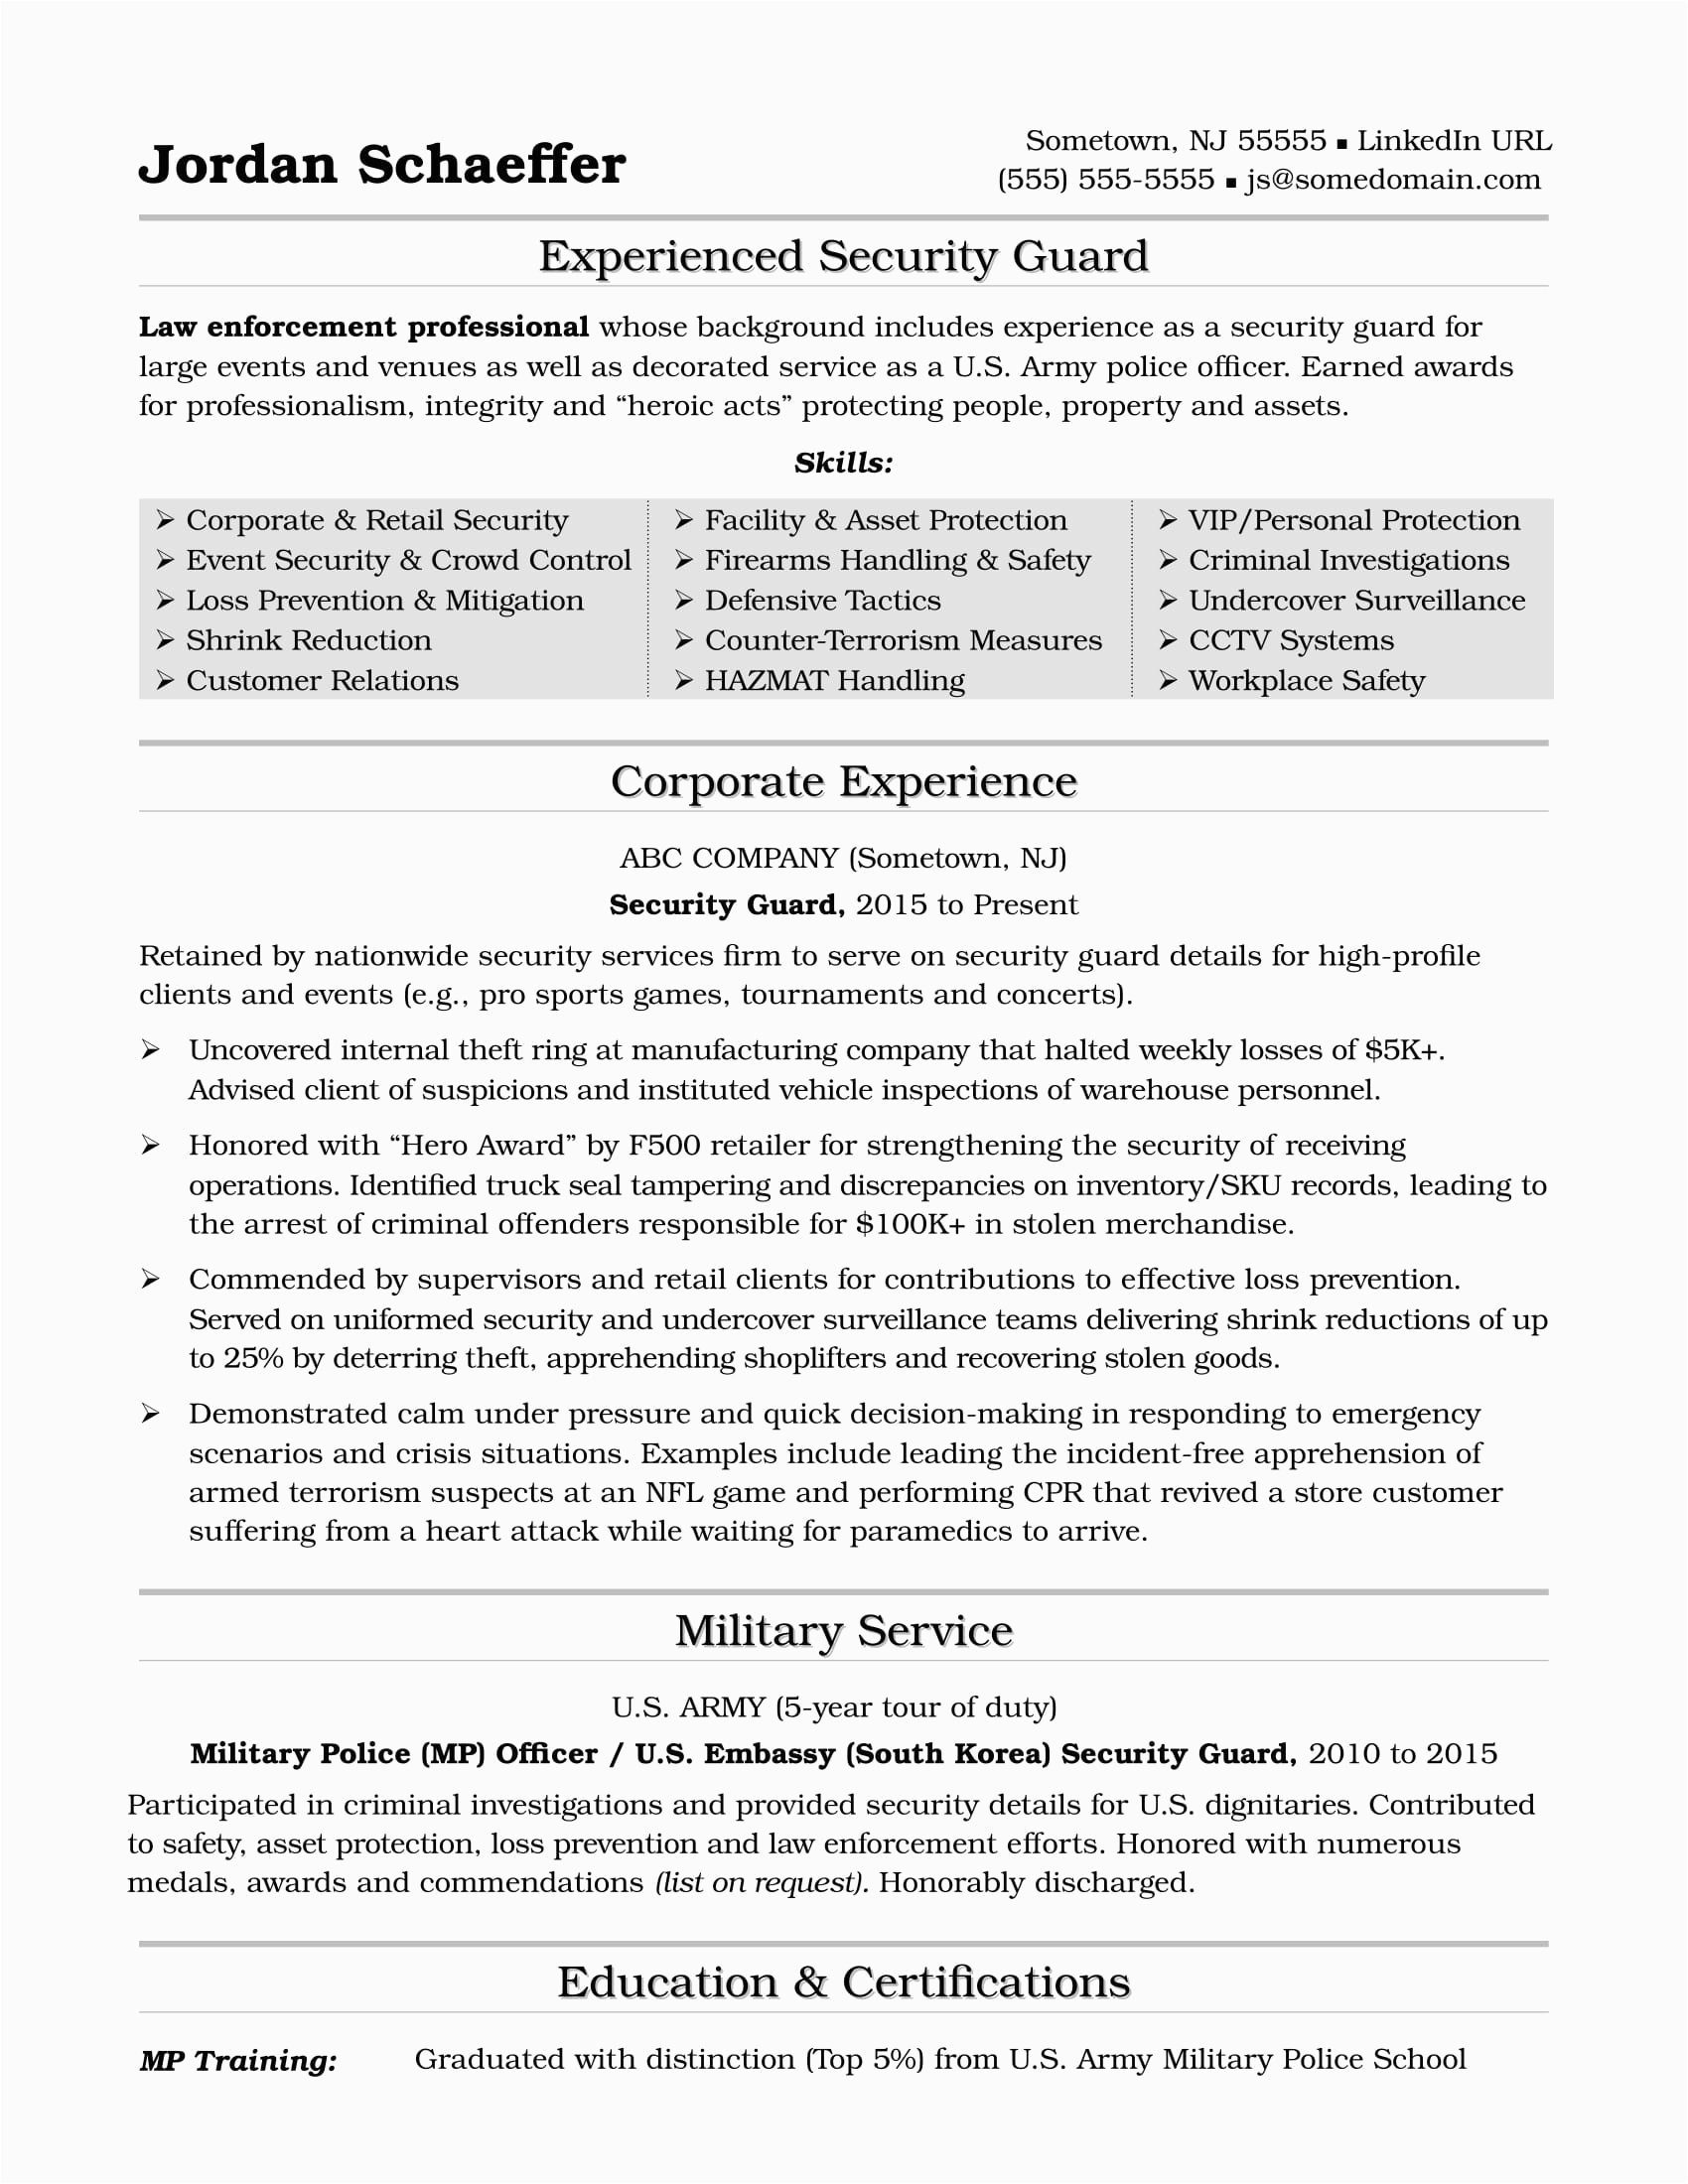 Sample Resume for Security Officer In India Security Guard Resume Sample